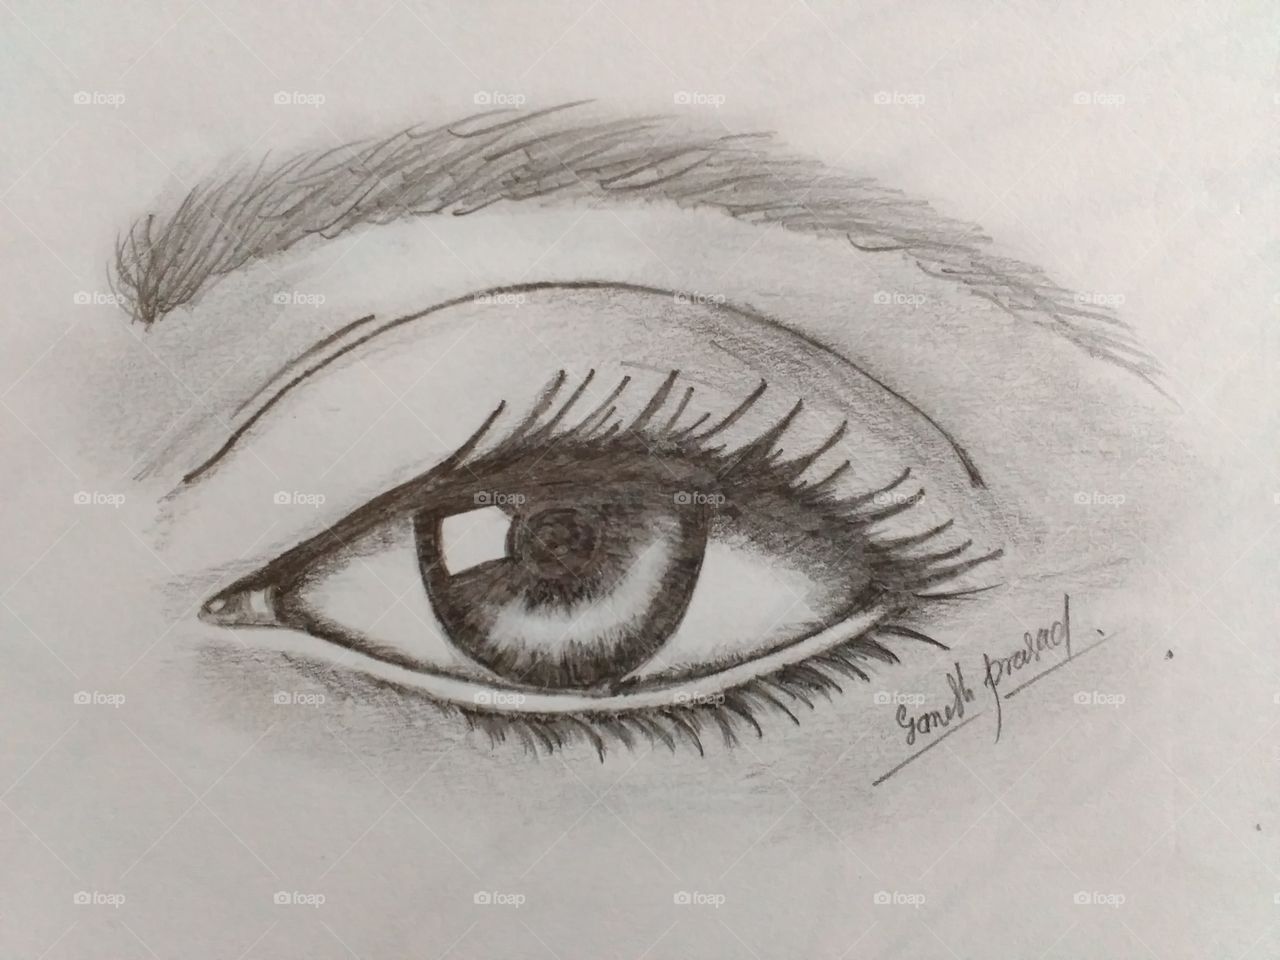 What is your first drawing/pencil shading? - Quora